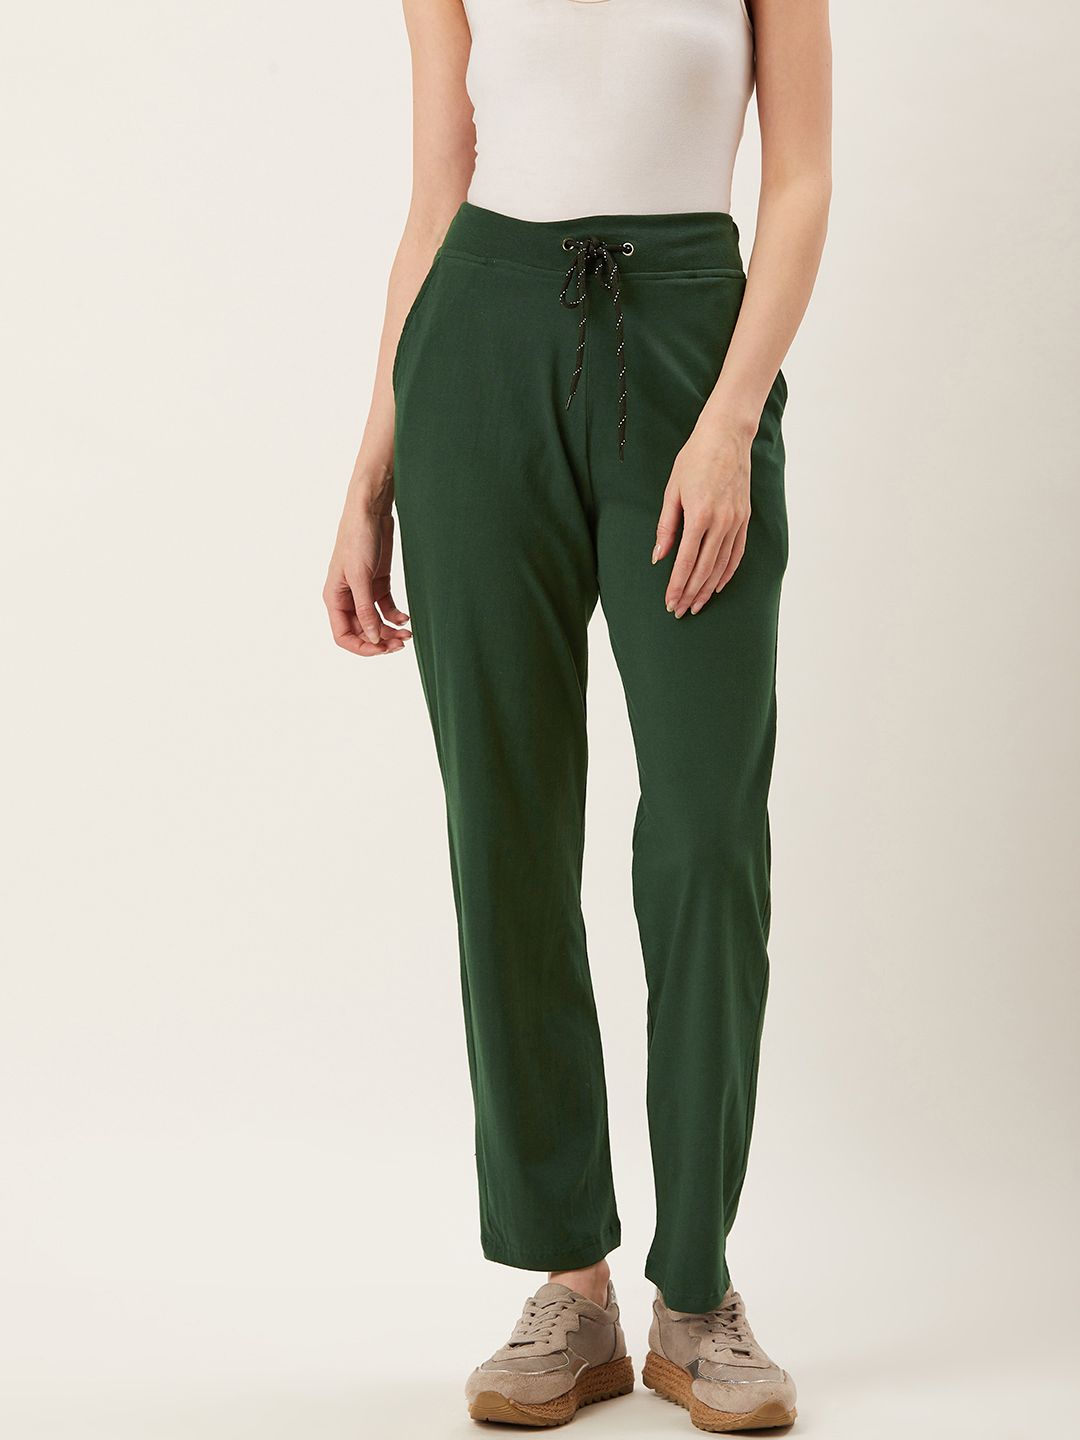 Alsace Lorraine Paris Women Green Solid Track Pants Price in India